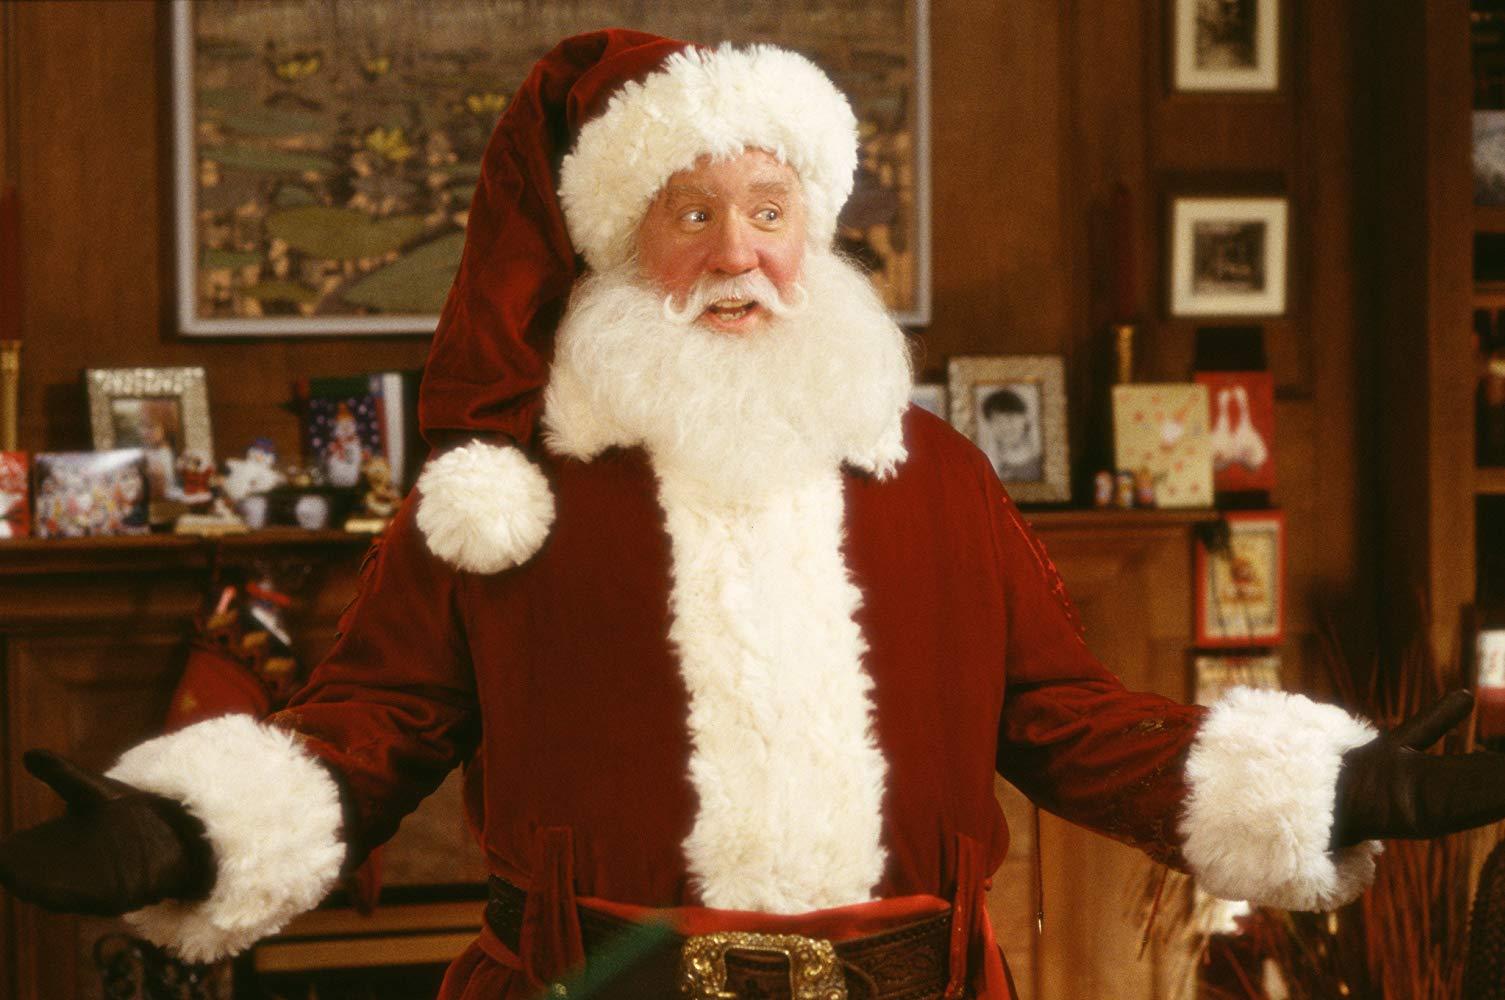 10 actors who have played Santa Claus in movies Business Insider Africa